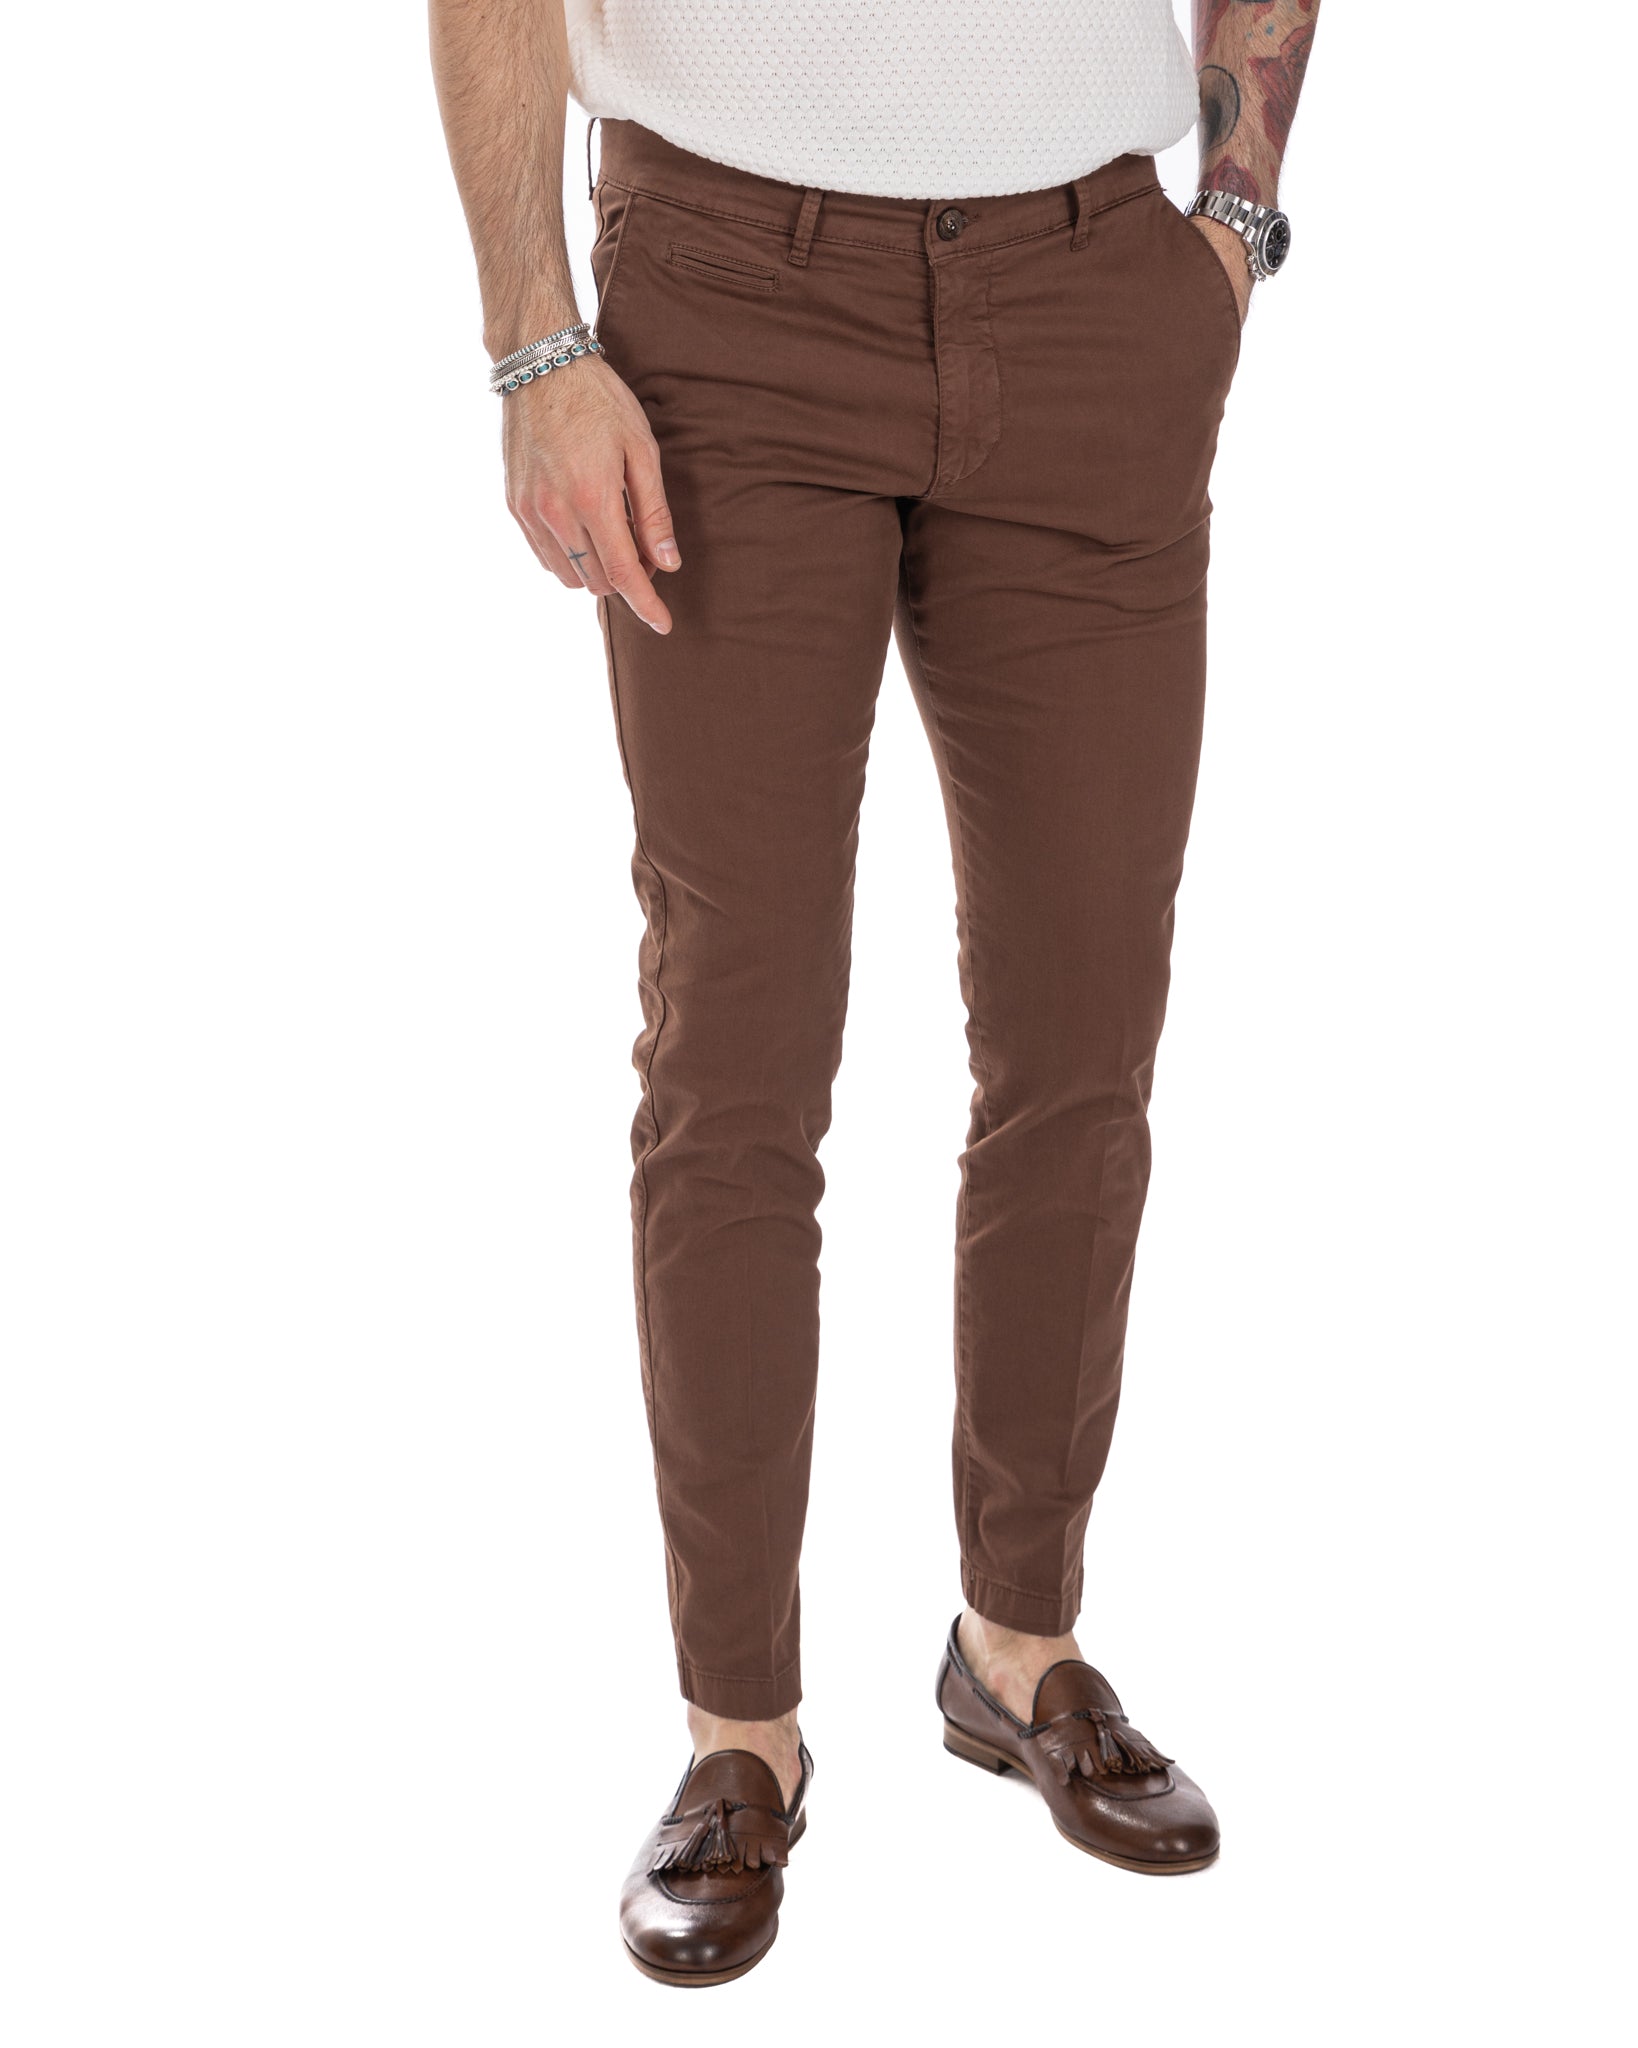 Frank - basic brown trousers